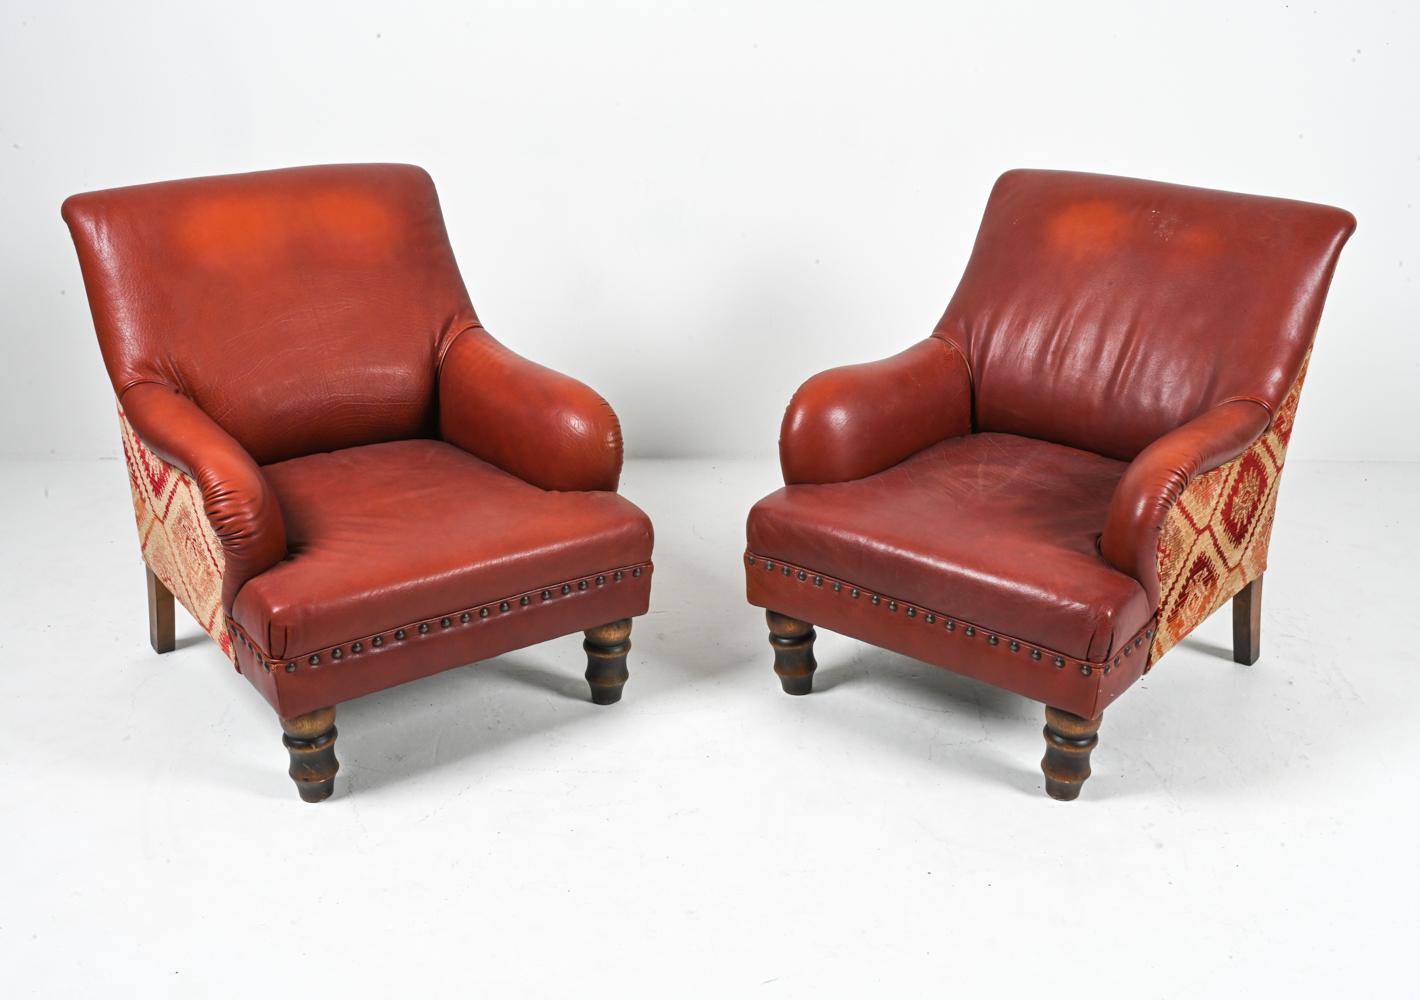 Behold the epitome of vintage luxury with this splendid pair of Roche Bobois lounge chairs—a testament to unparalleled craftsmanship and timeless design. Draped in a deep brick-red, these chairs showcase the robust beauty of treated buffalo leather